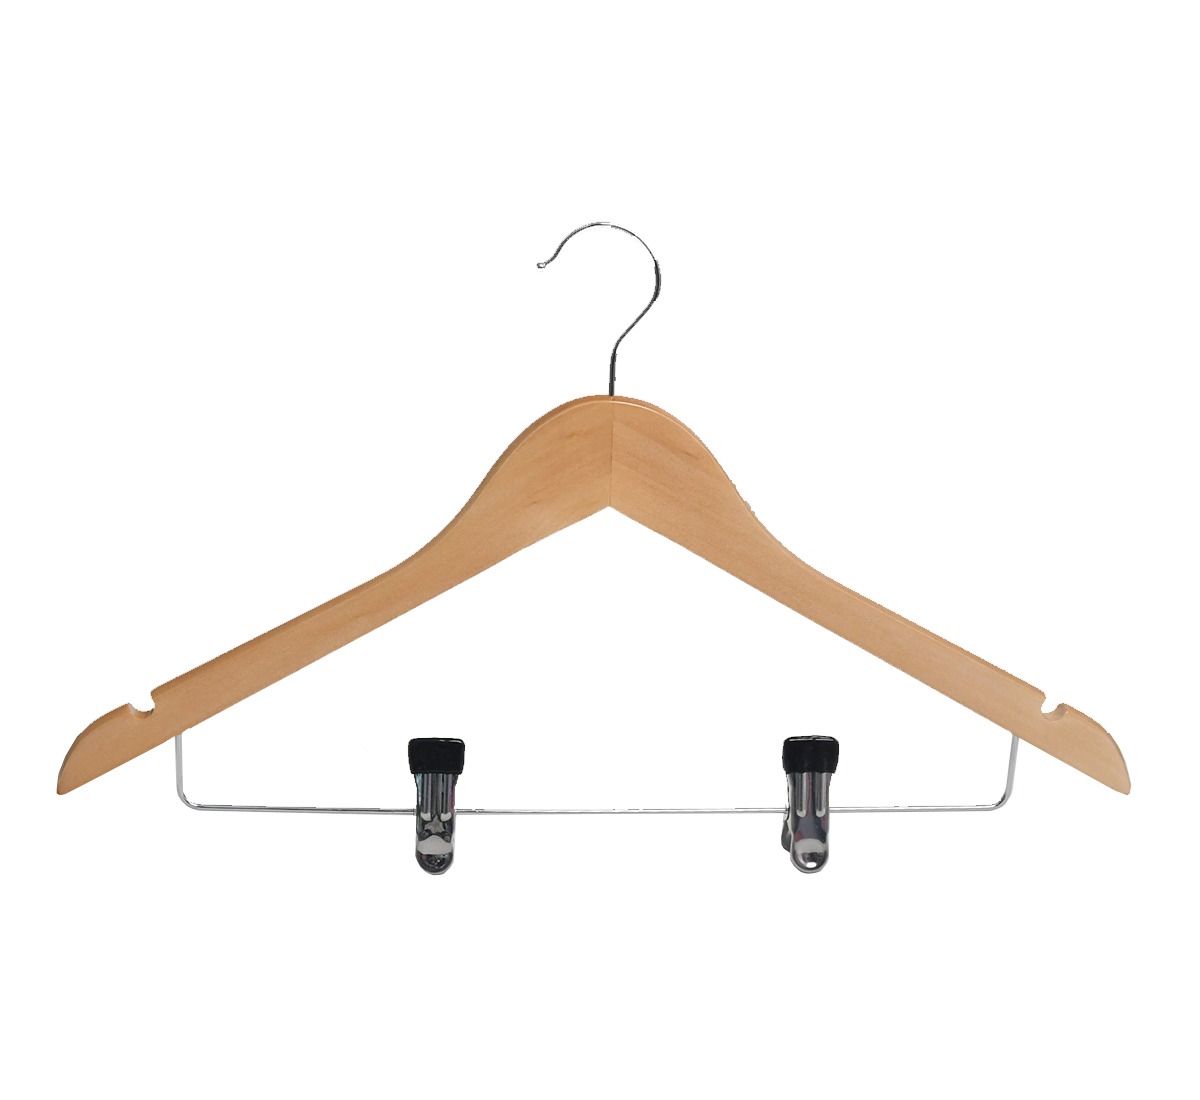 Cherry Wood Normal cloth hanger with 2 clips
